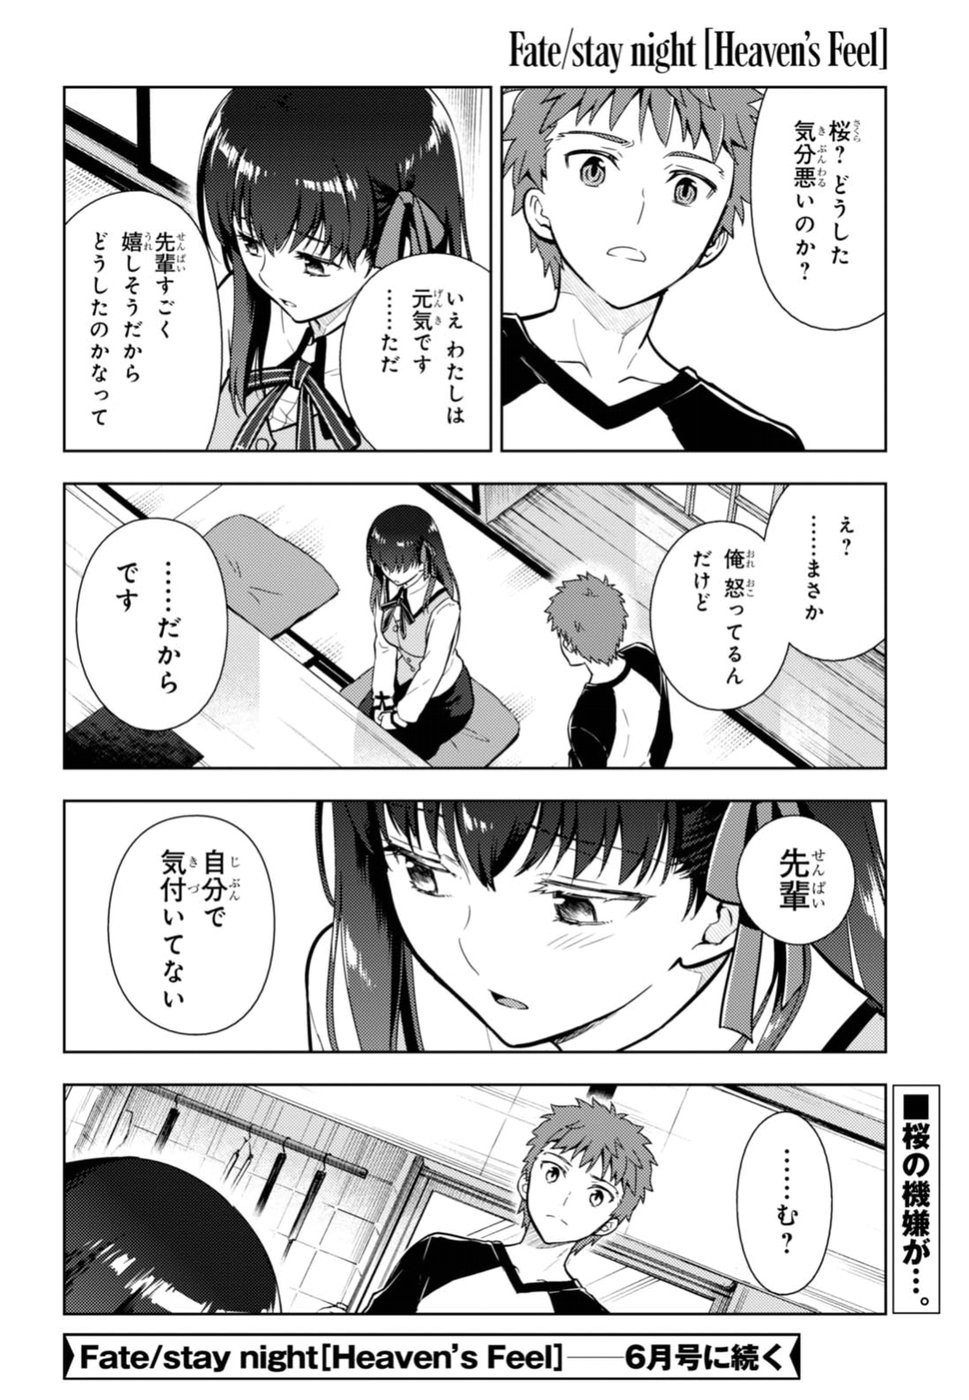 Fate/Stay night Heaven's Feel - Chapter 36 - Page 37